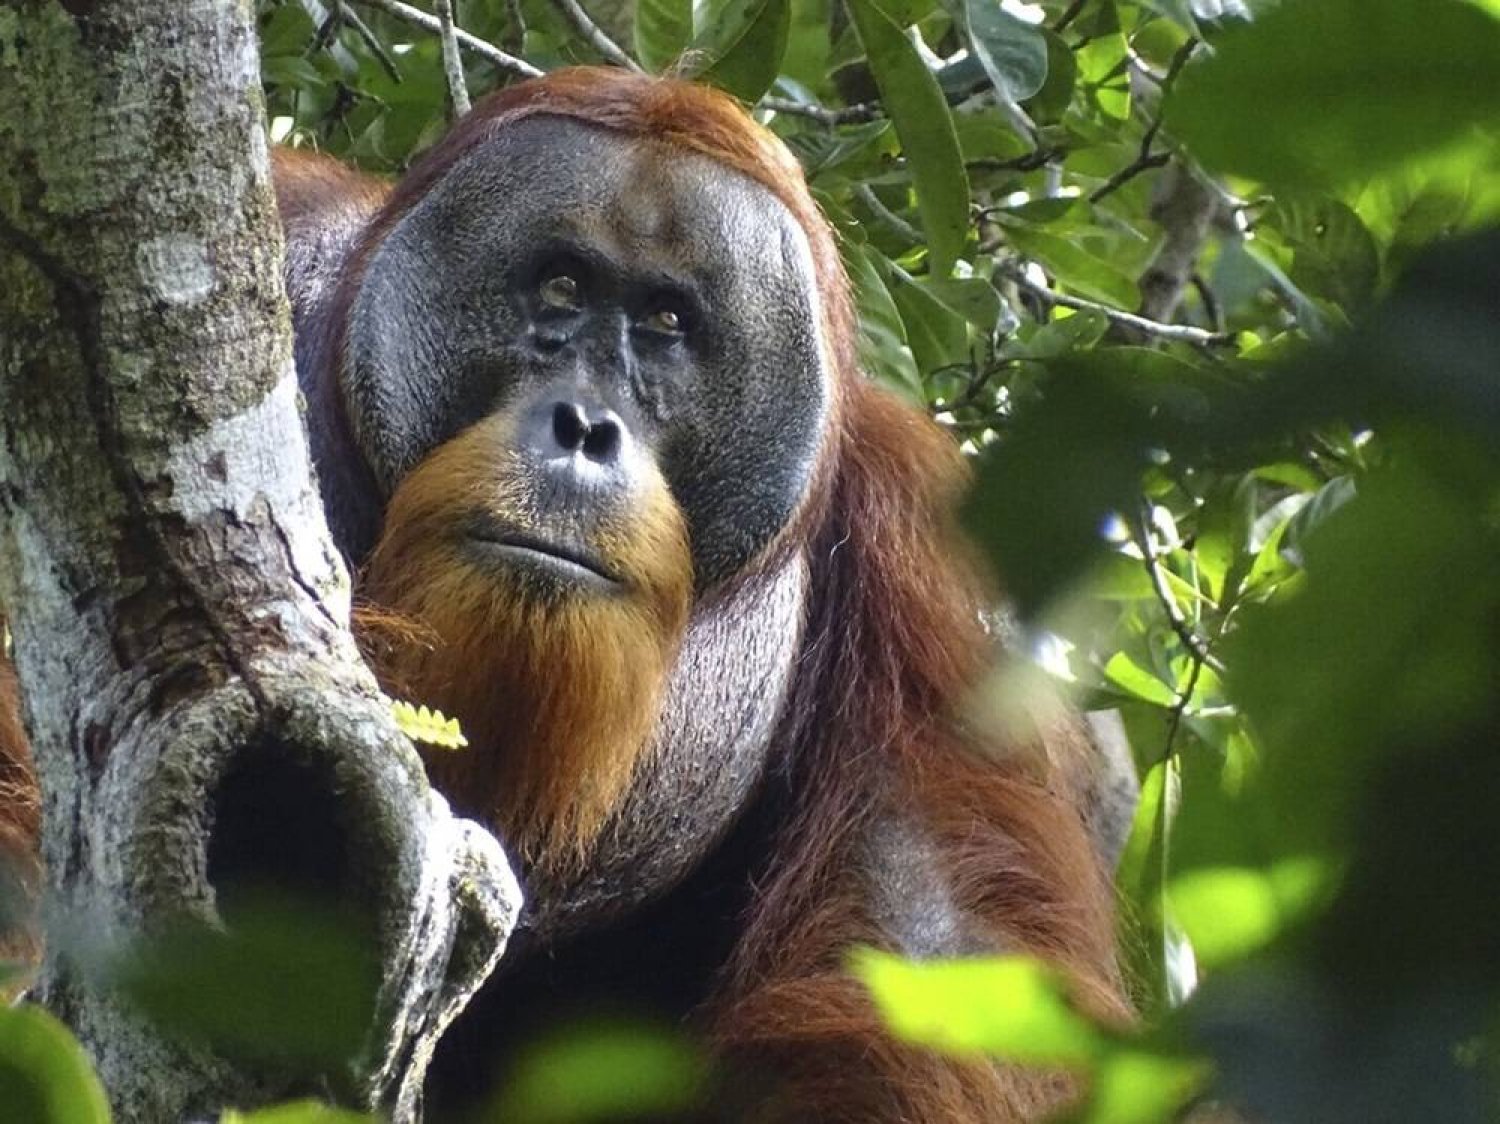 This photo provided by the Suaq foundation shows Rakus, a wild male Sumatran orangutan in Gunung Leuser National Park, Indonesia, on Aug. 25, 2022, after his facial wound was barely visible. (Safruddin/Suaq foundation via AP) 